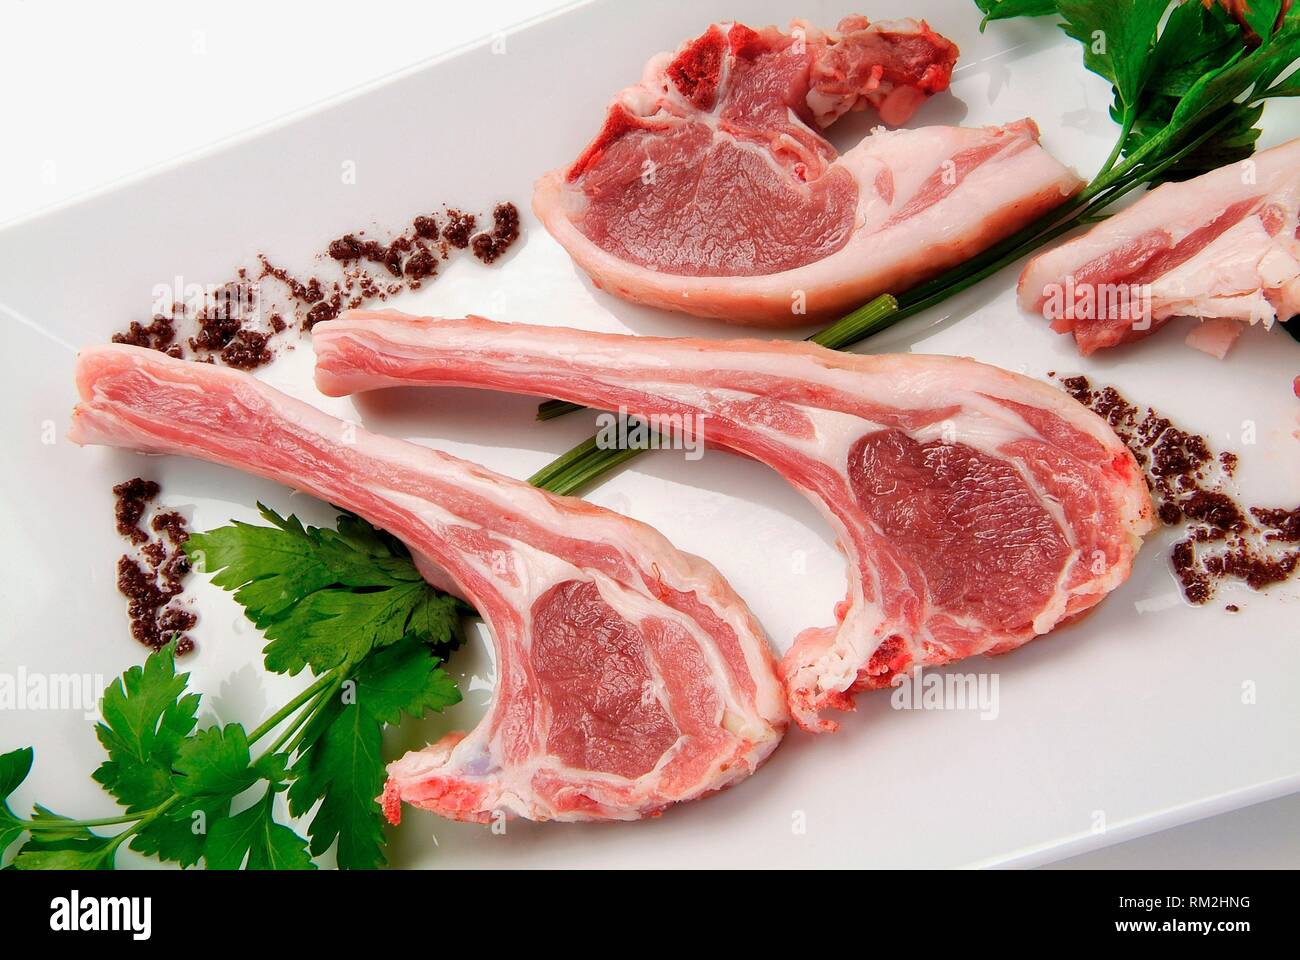 Photography studio, creative image, plate of lamb chops ready for cooking, location girona, catalonia, spain, europe. Stock Photo